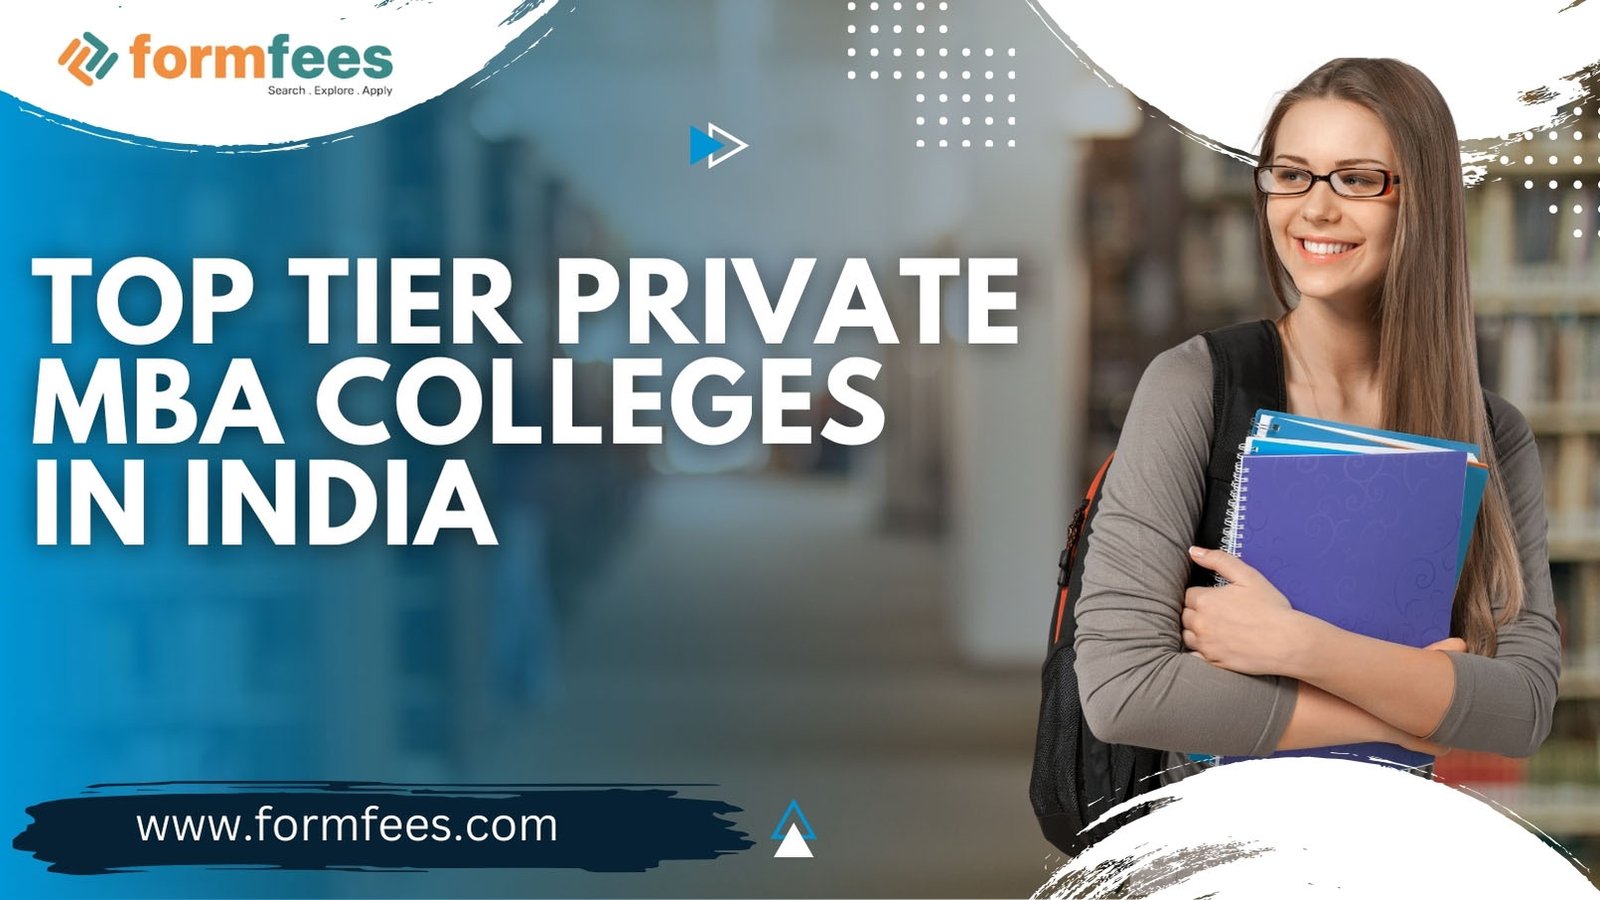 Top Tier Private MBA Colleges in India